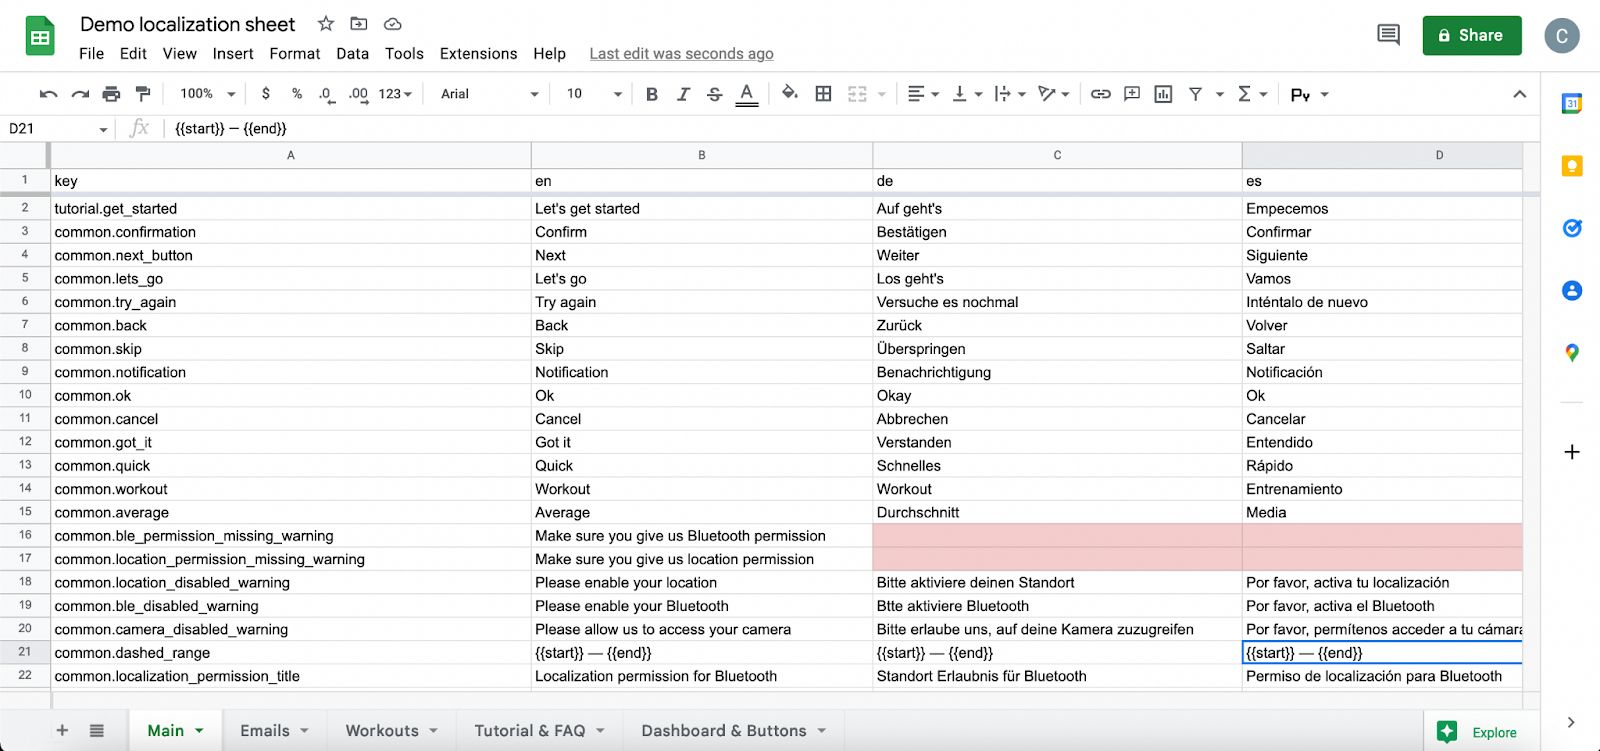 Example of localization using Google Sheets